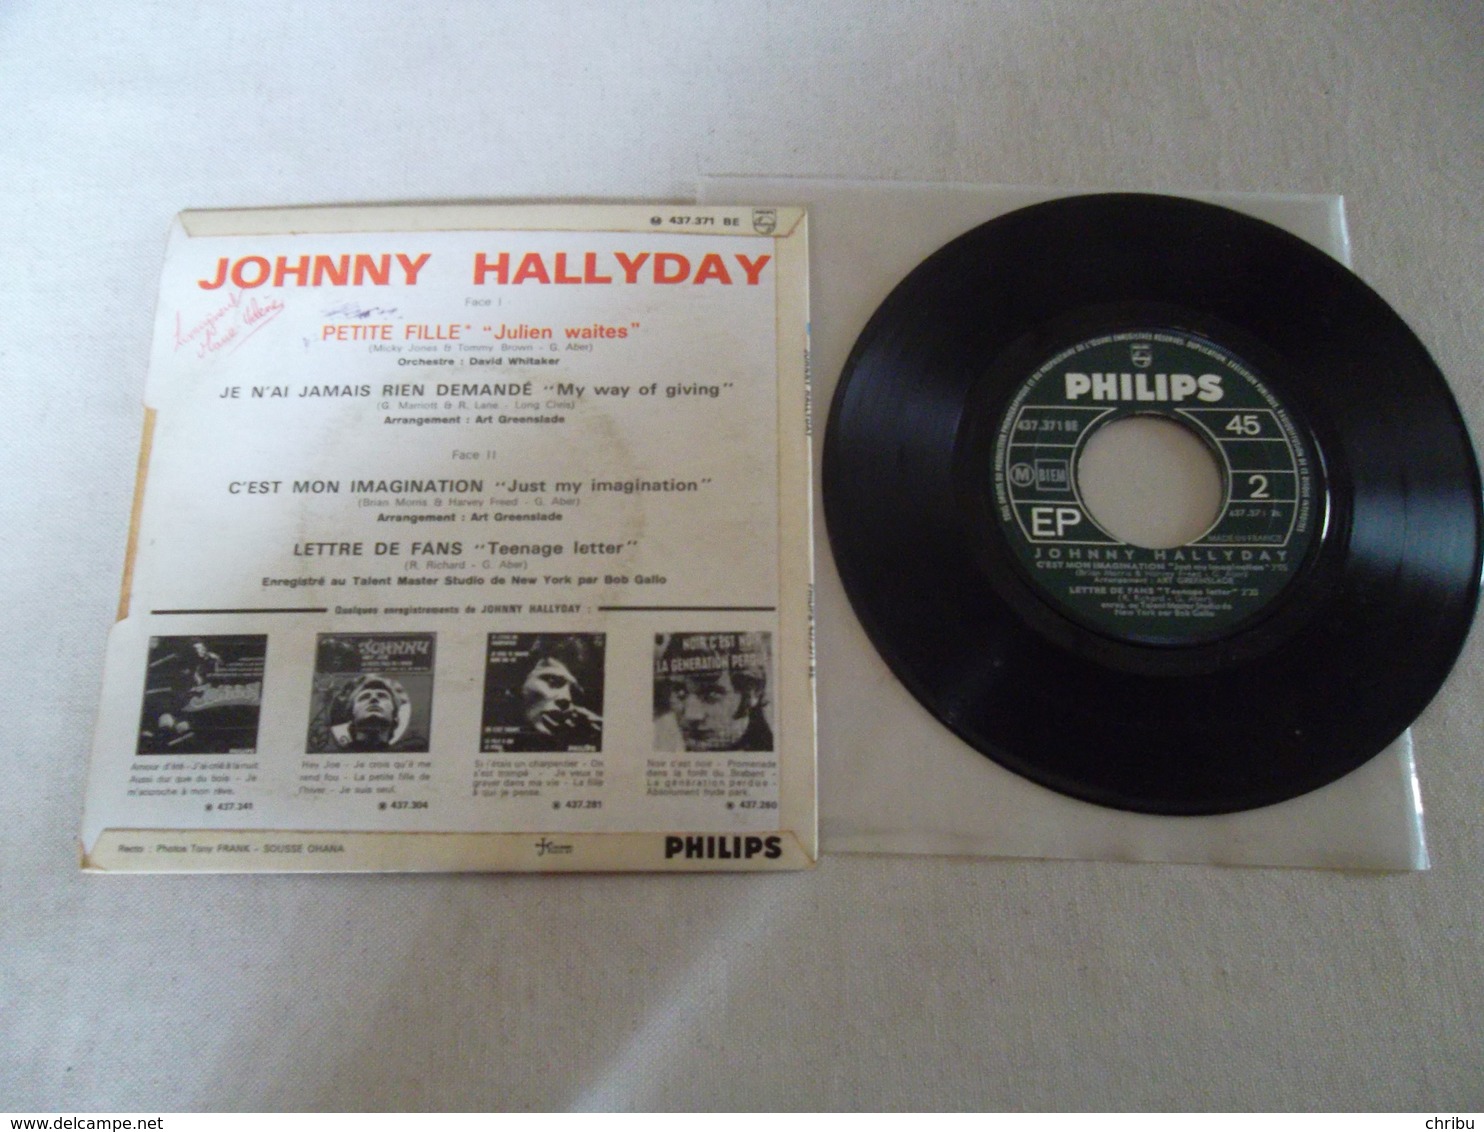 VINYLE 45 T JOHNNY HALLYDAY PETITE FILLE PHILIPS 437 371 BE - 45 T - Maxi-Single